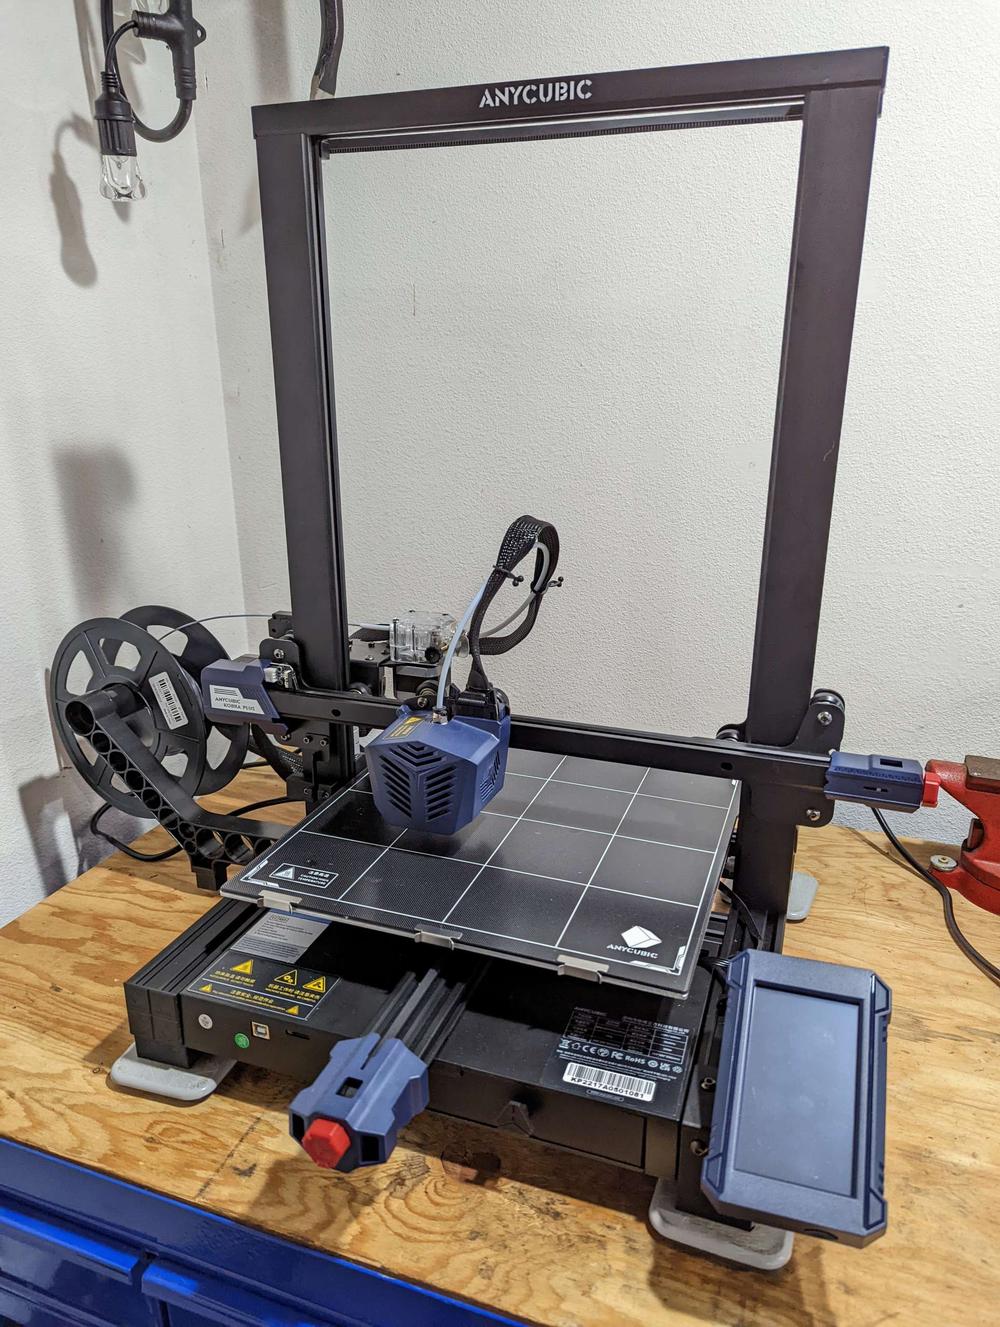 A blue and black 3D printer is printing a blue object on a glass bed.